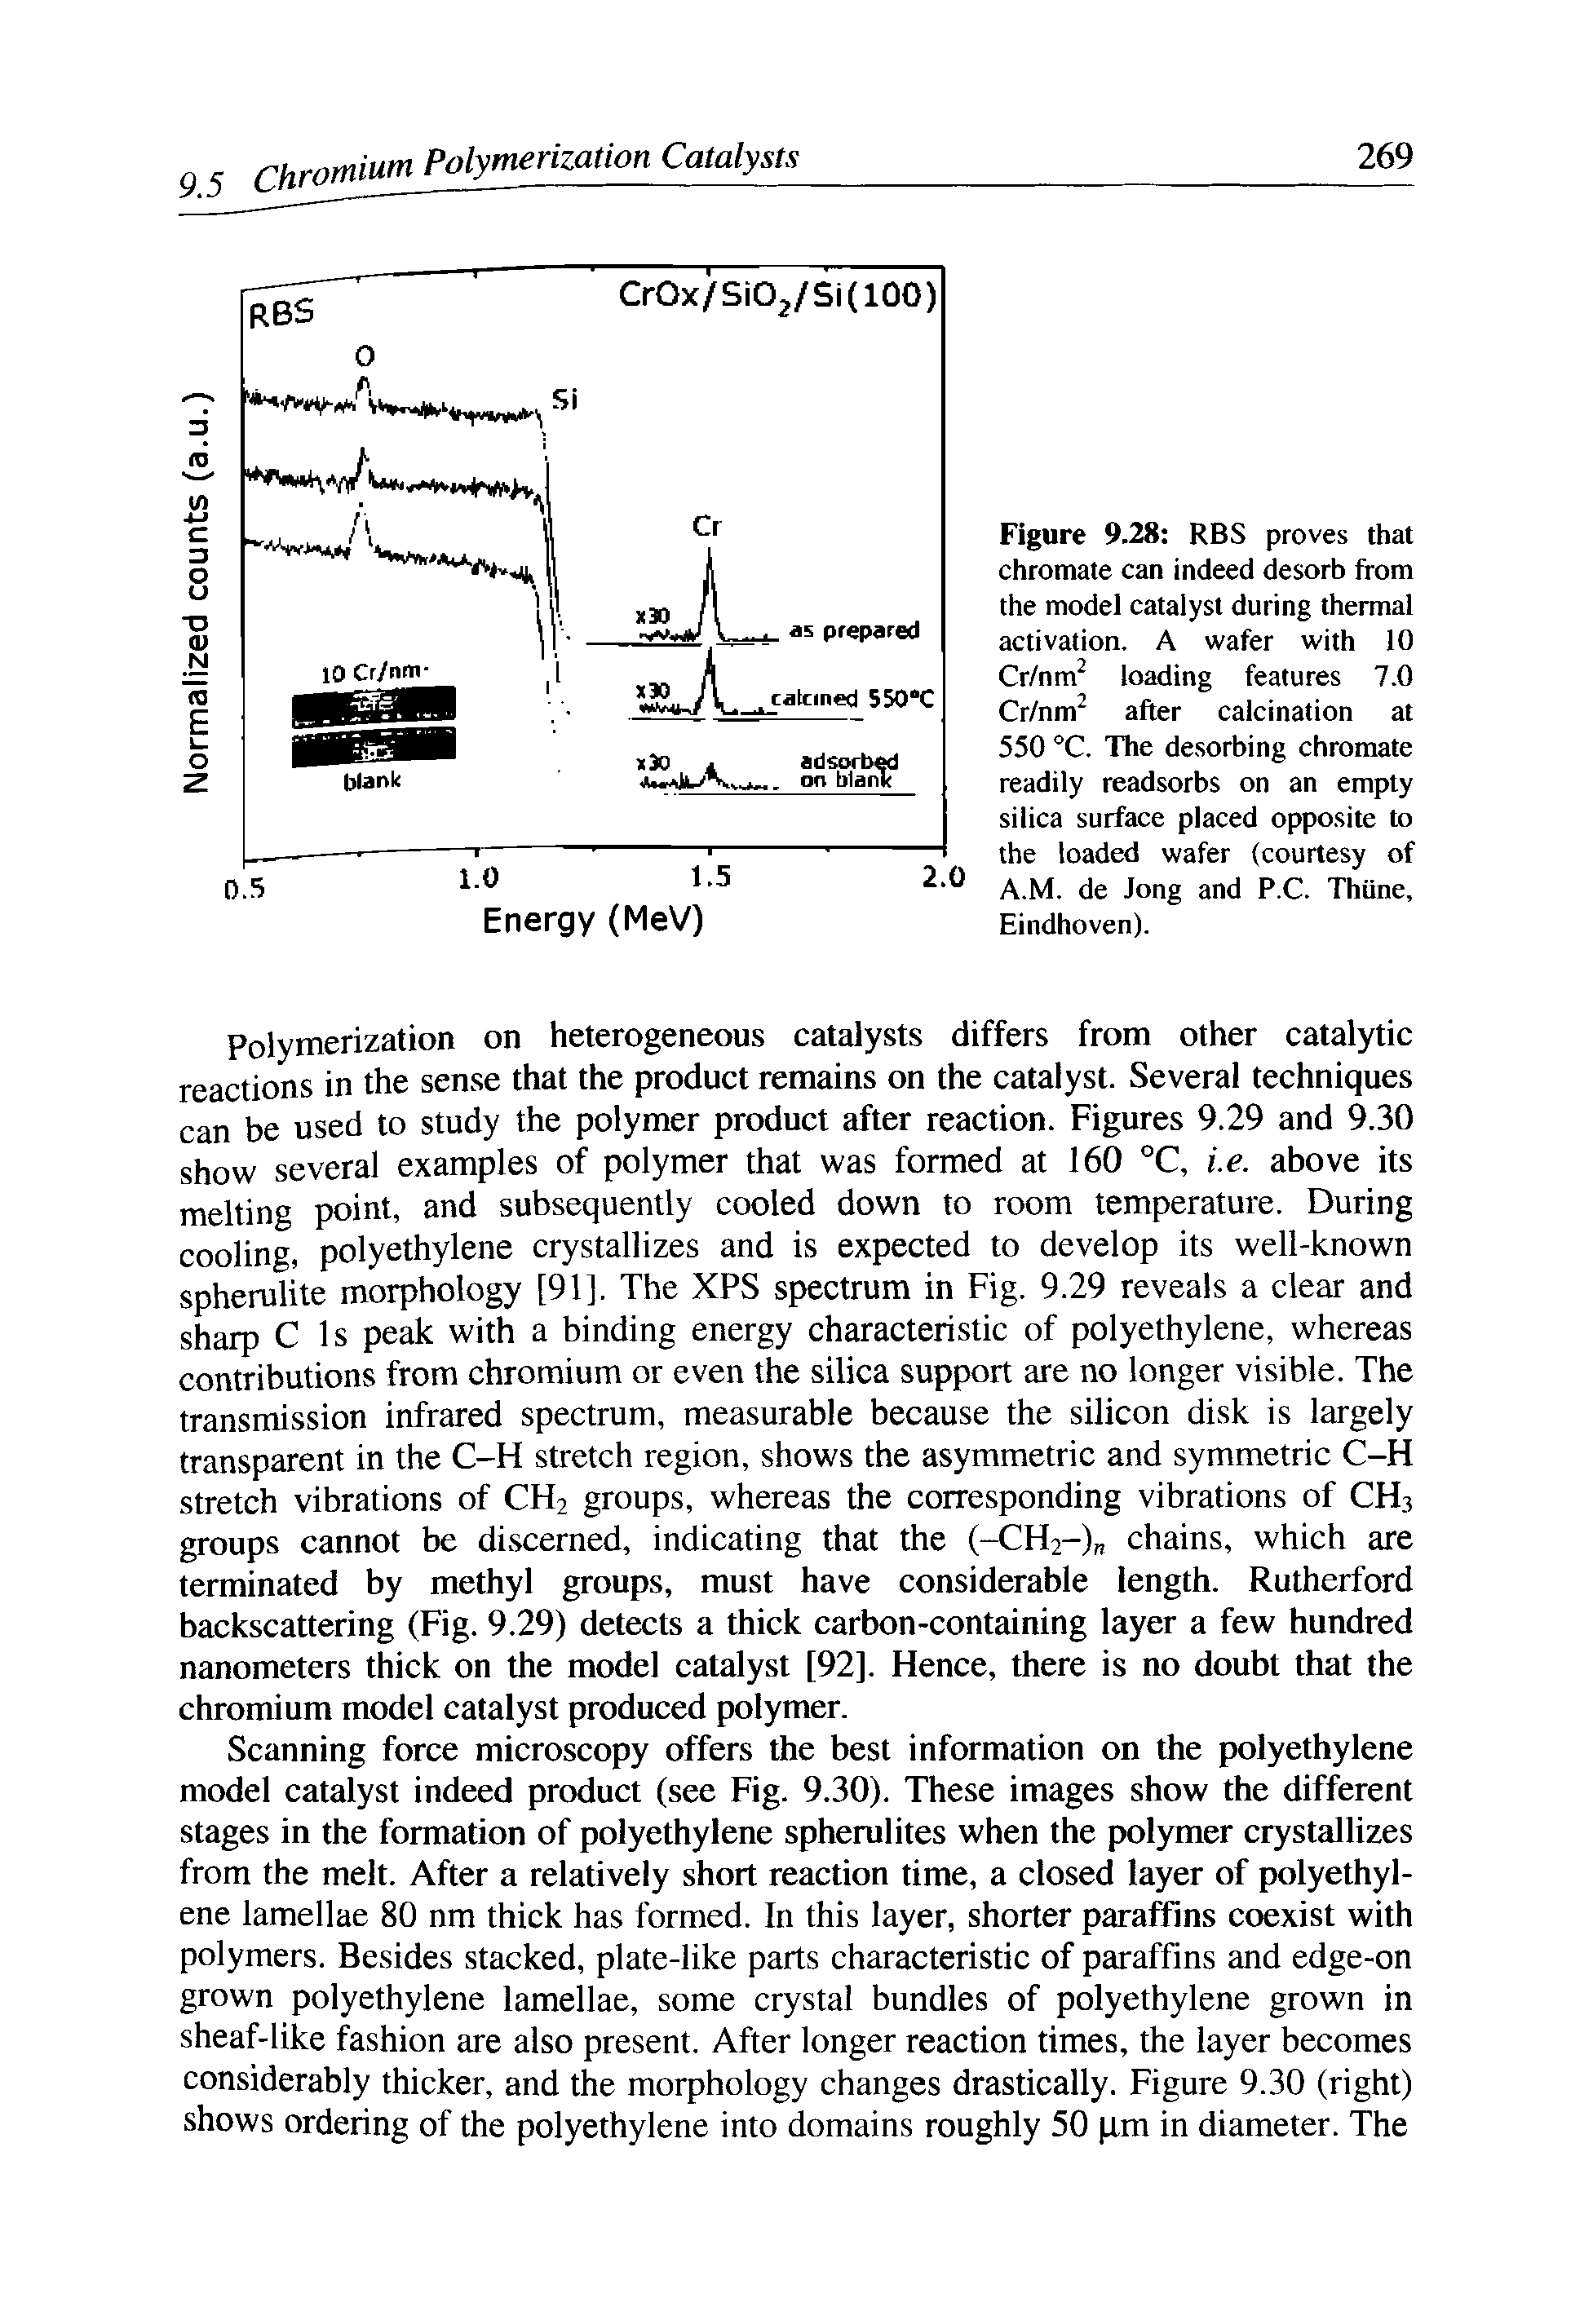 Figure 9.28 RBS proves that chromate can indeed desorb from the model catalyst during thermal activation. A wafer with 10 Cr/nm2 loading features 7.0 Cr/nm2 after calcination at 550 °C. The desorbing chromate readily readsorbs on an empty silica surface placed opposite to the loaded wafer (courtesy of...